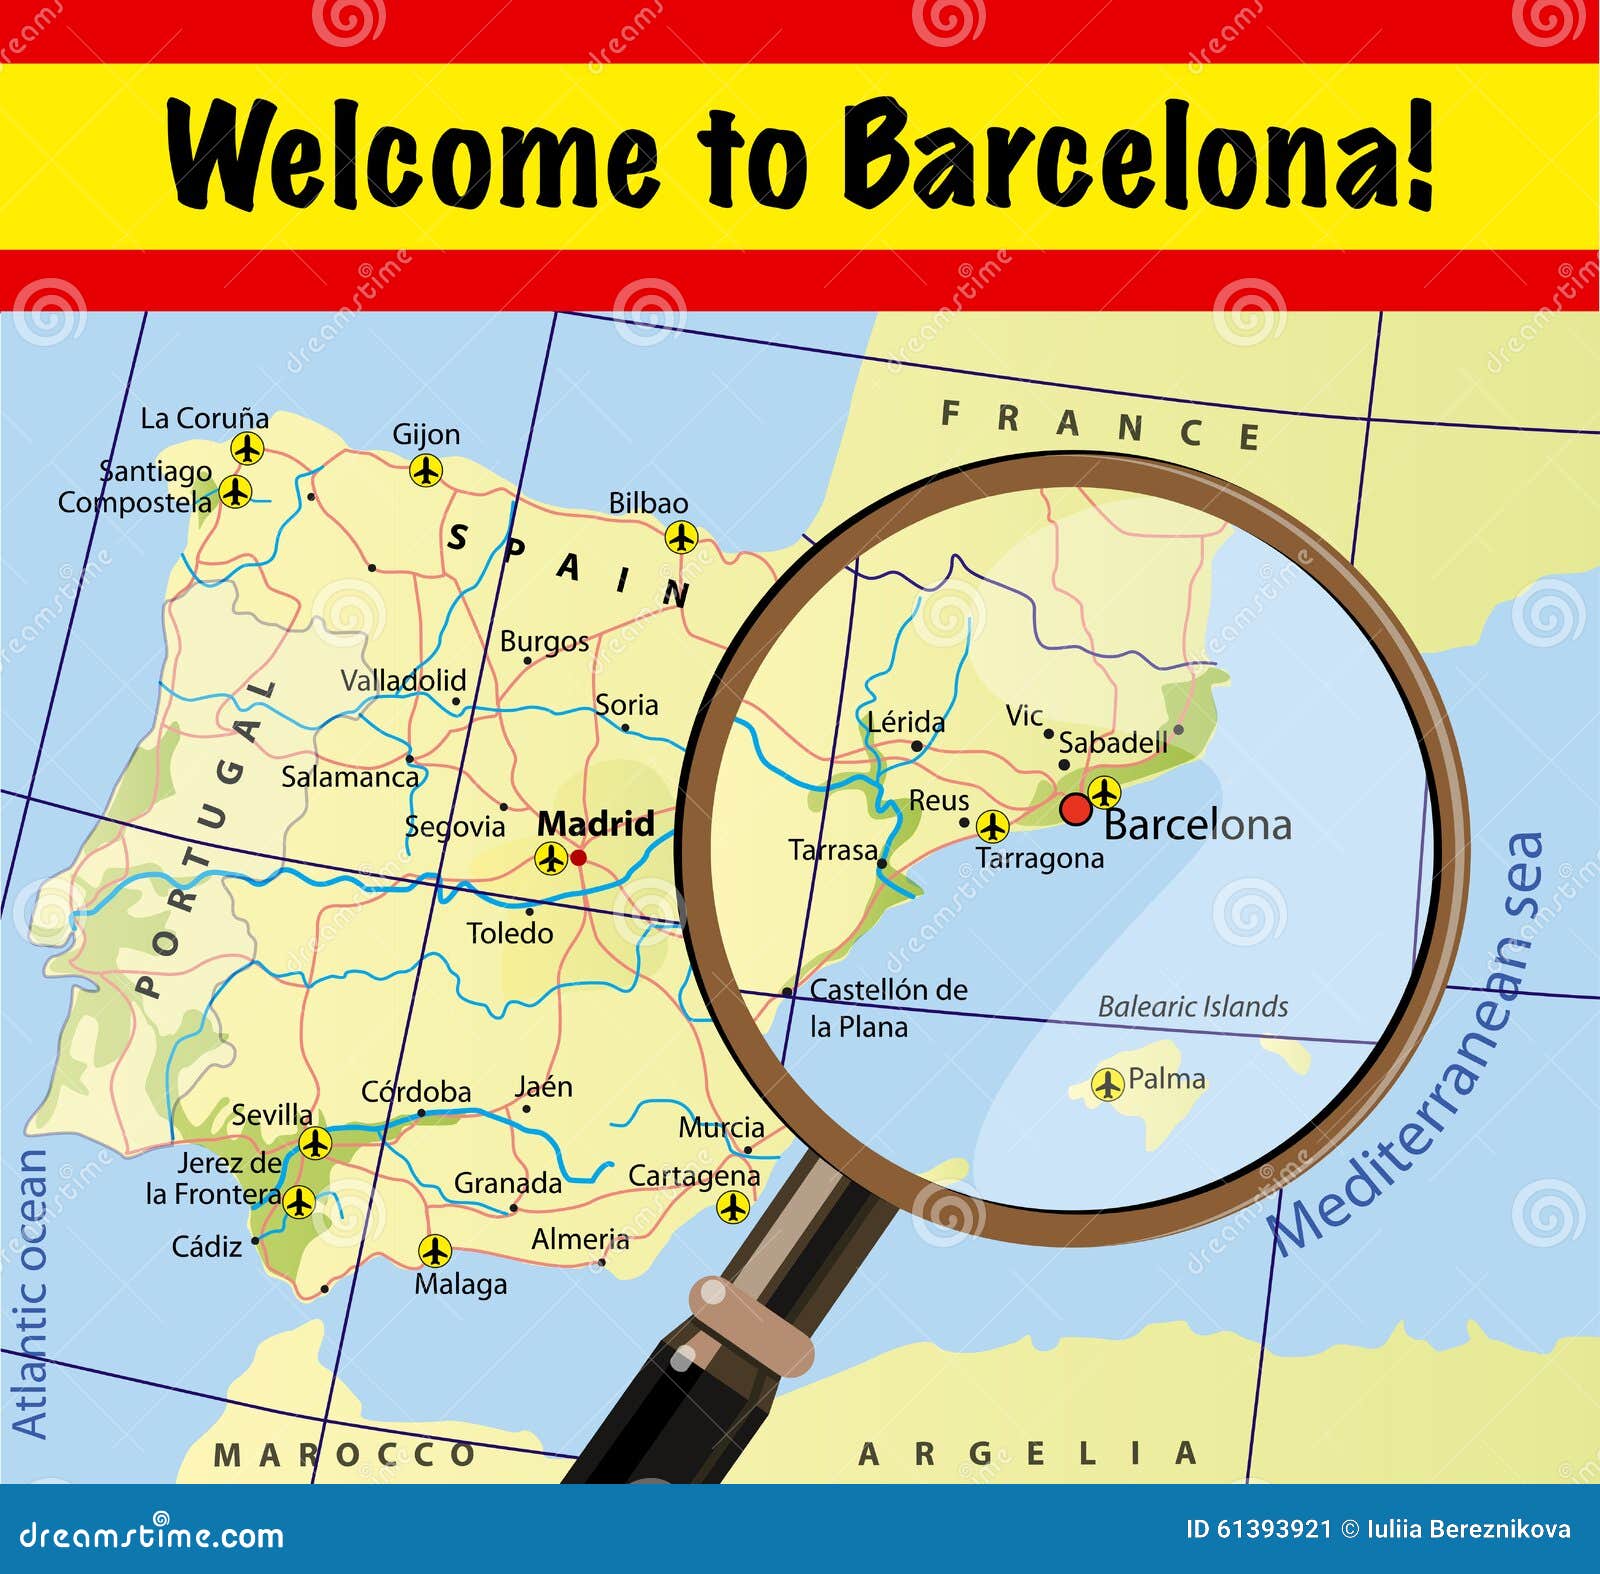 welcome to barcelona map spain 61393921